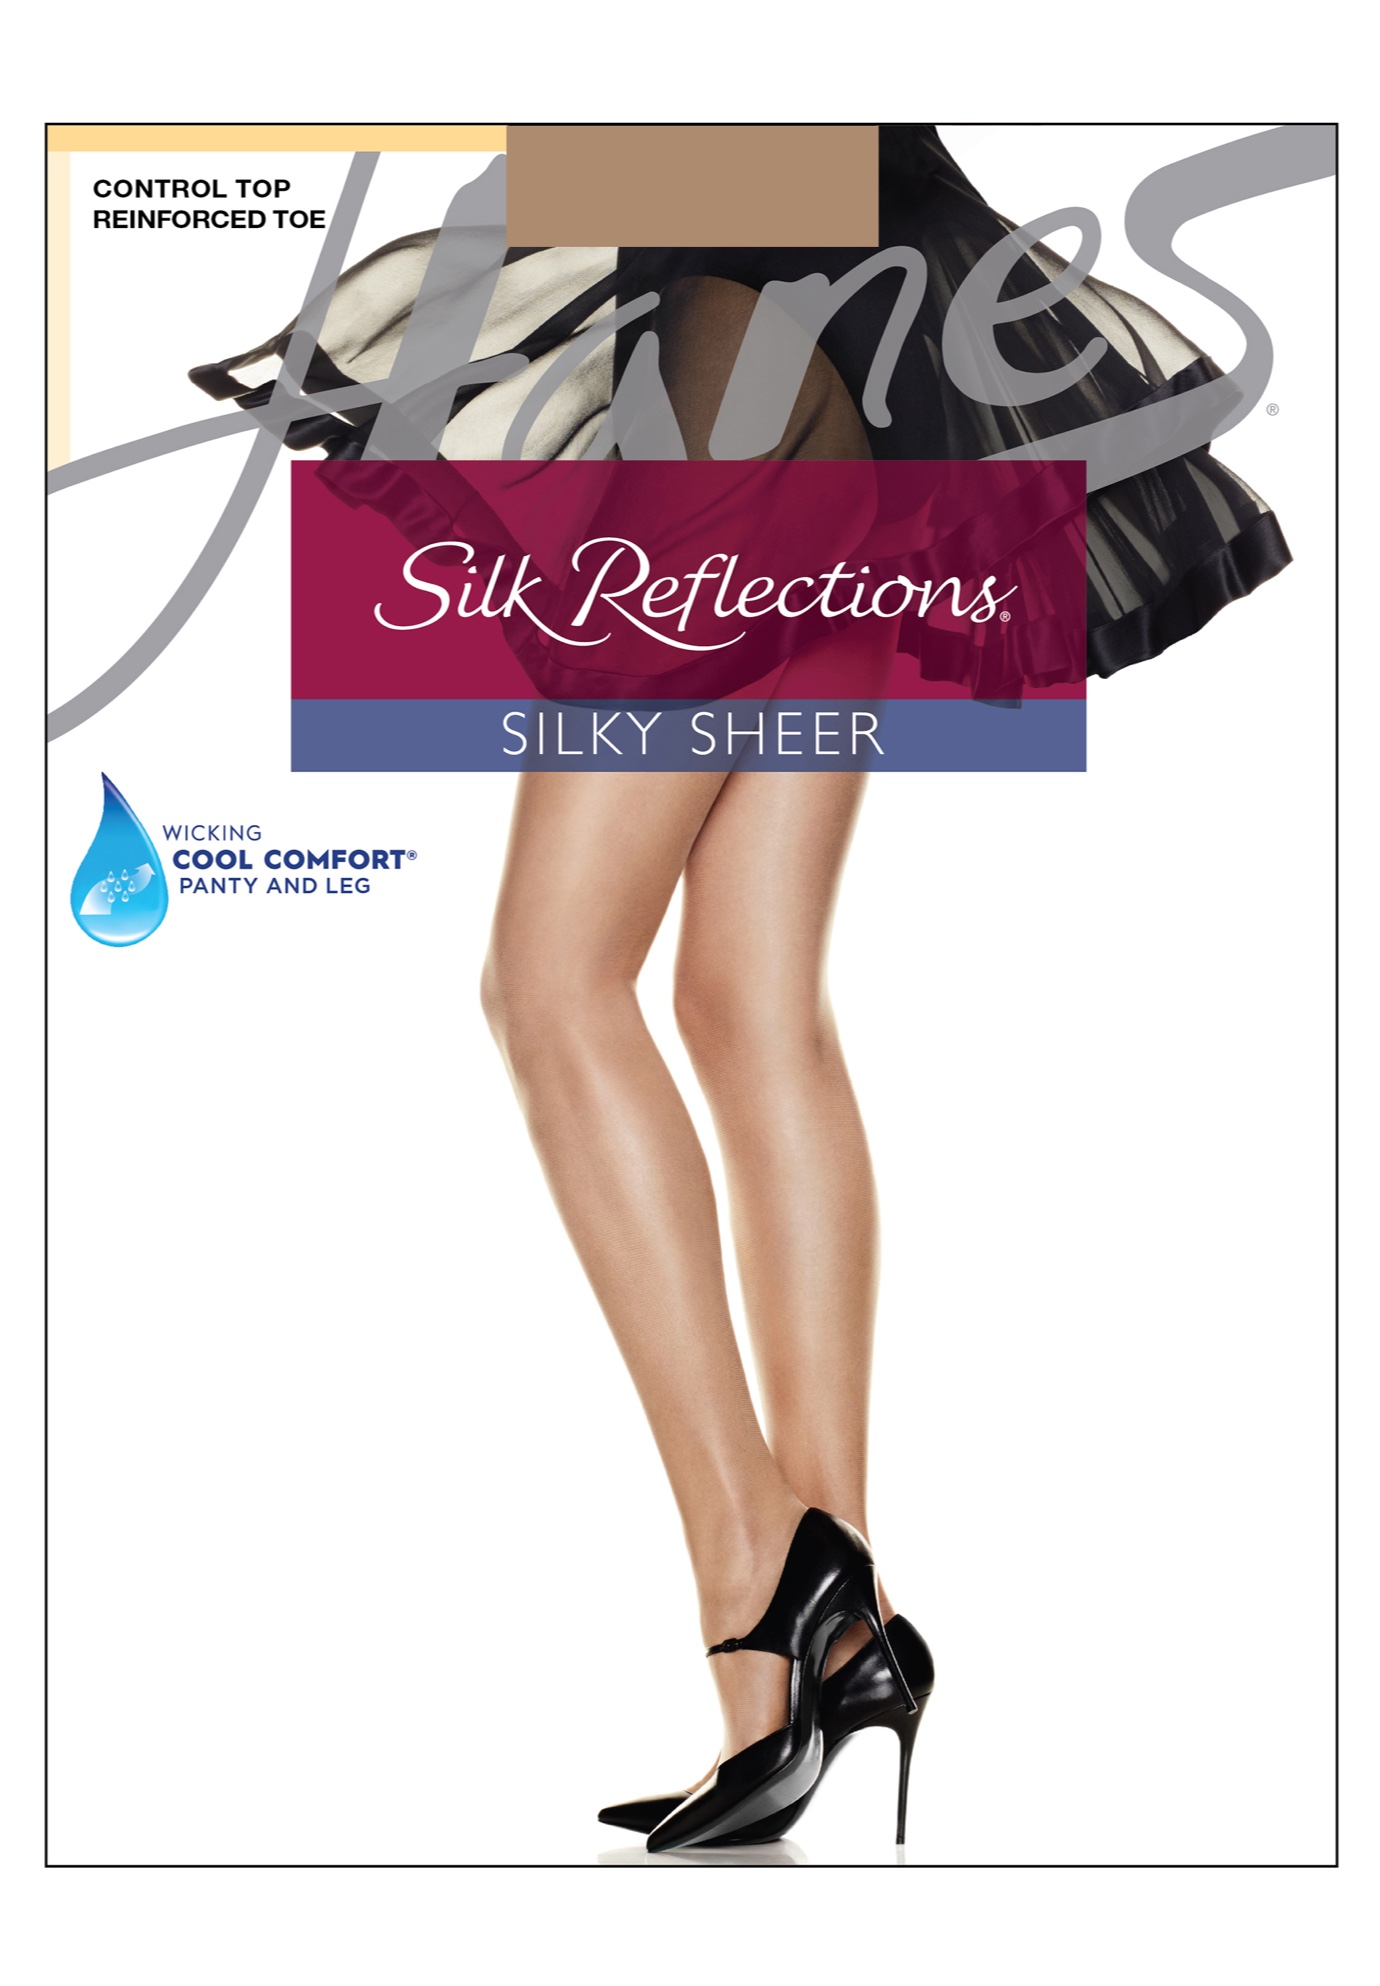 Silk Reflections Silky Sheer Control Top Reinforced Toe 6-Pack, 